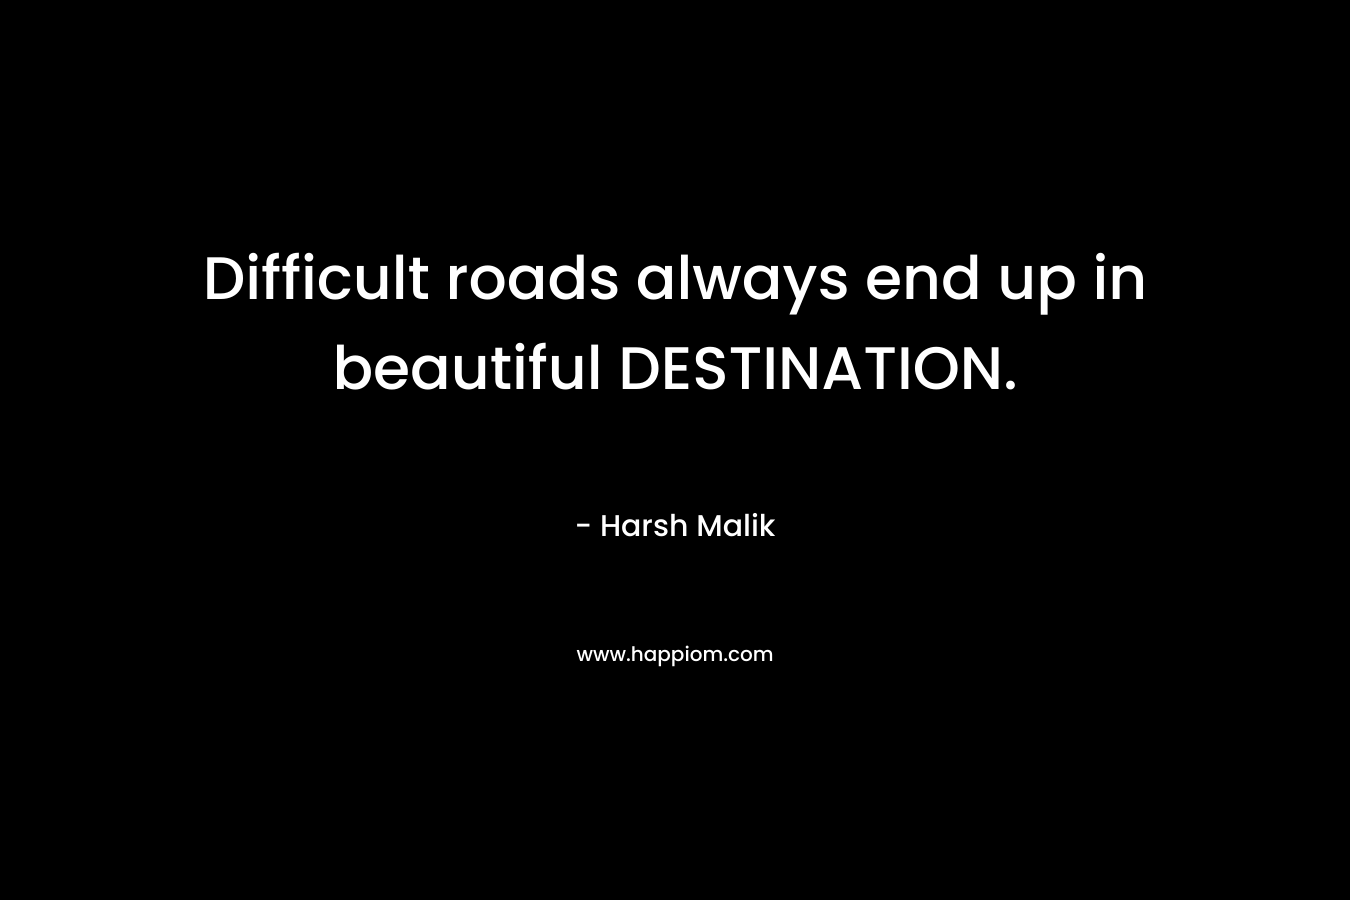 Difficult roads always end up in beautiful DESTINATION.